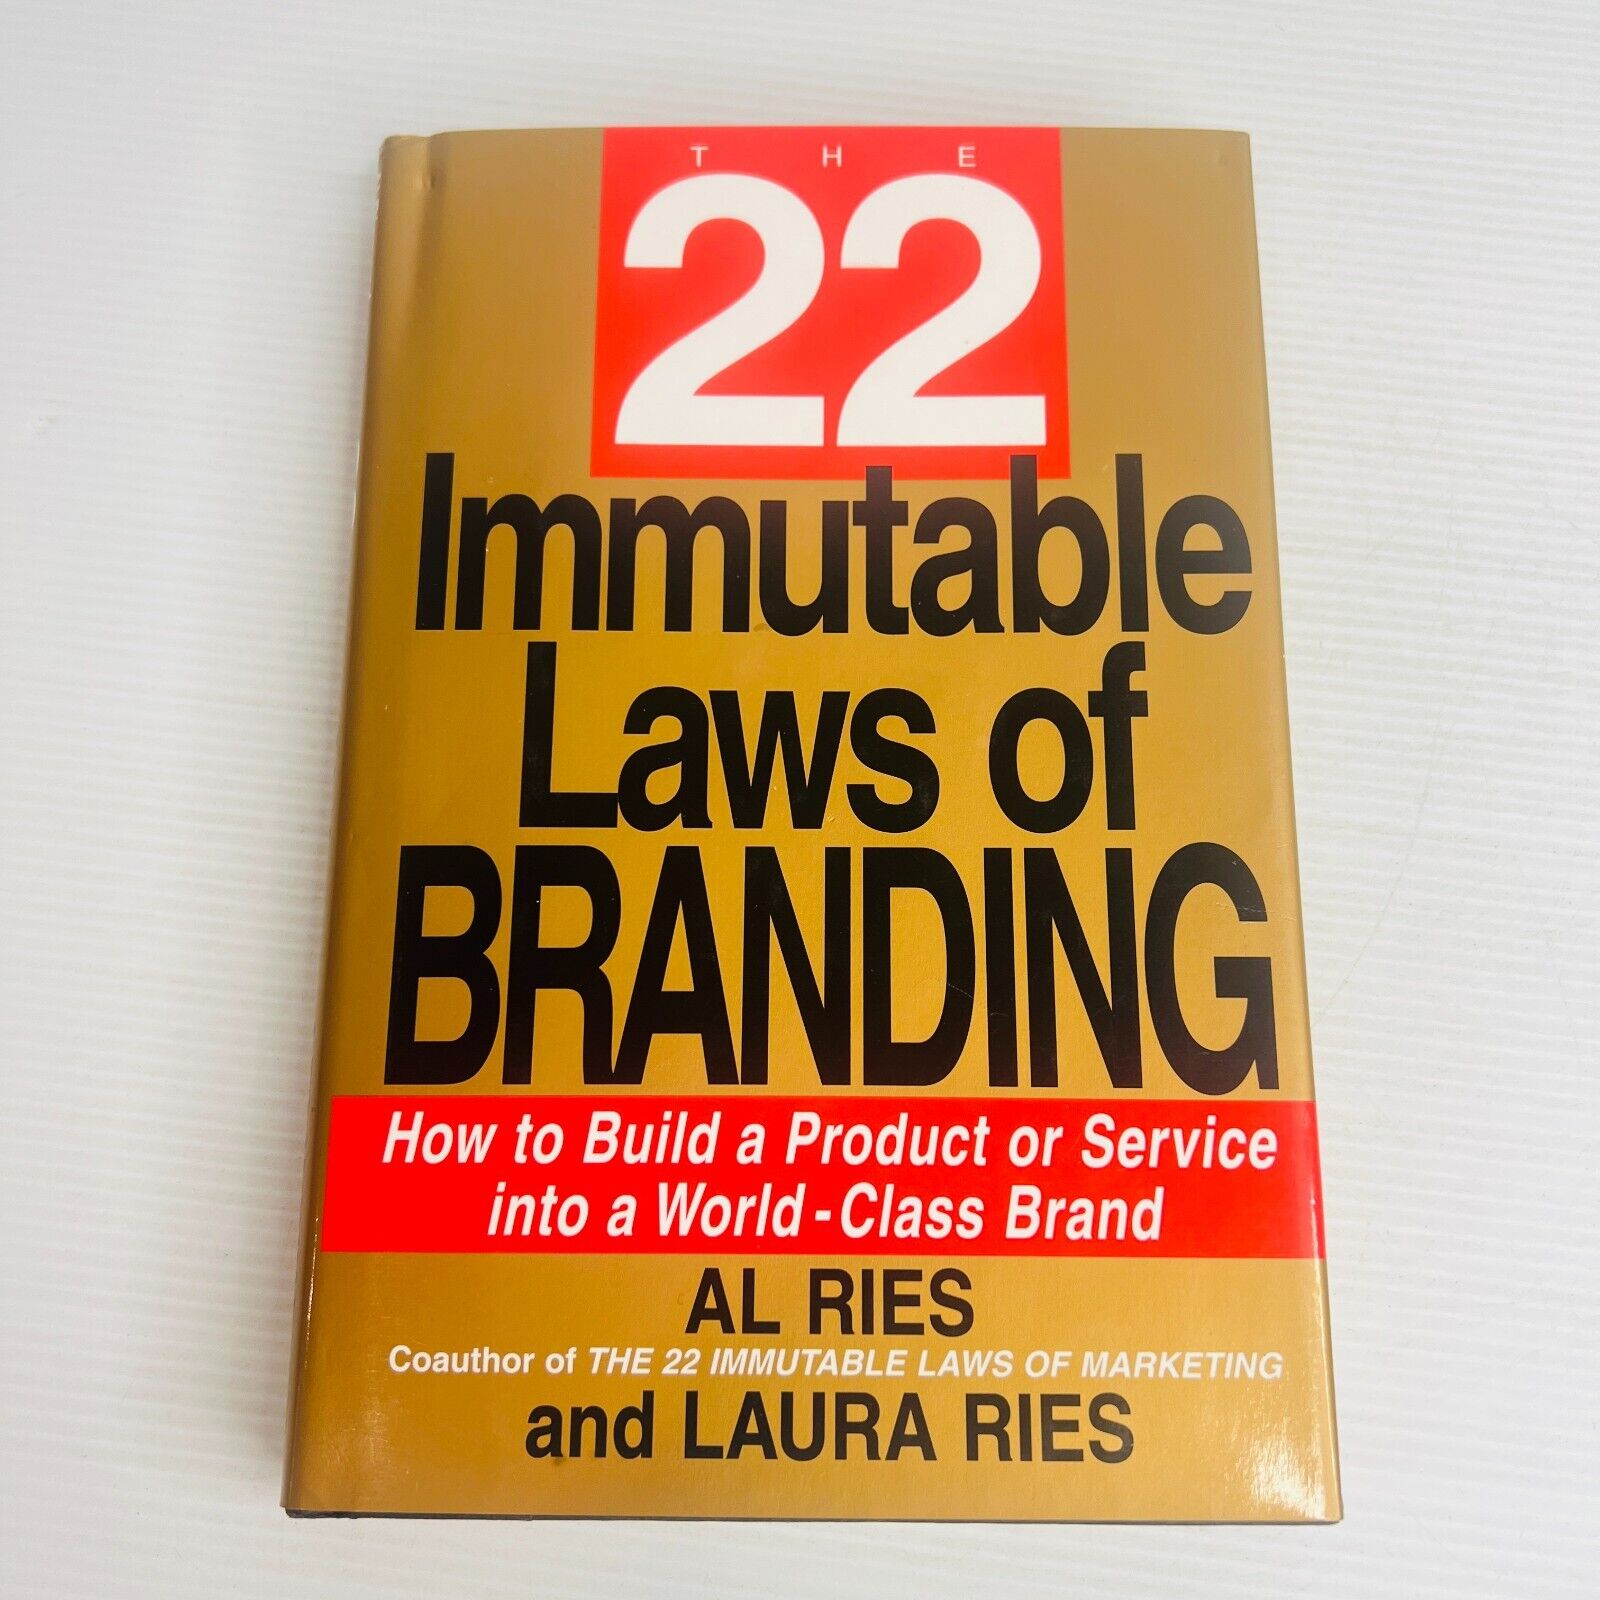 22 Branding Laws: Build a World-Class Product/Service